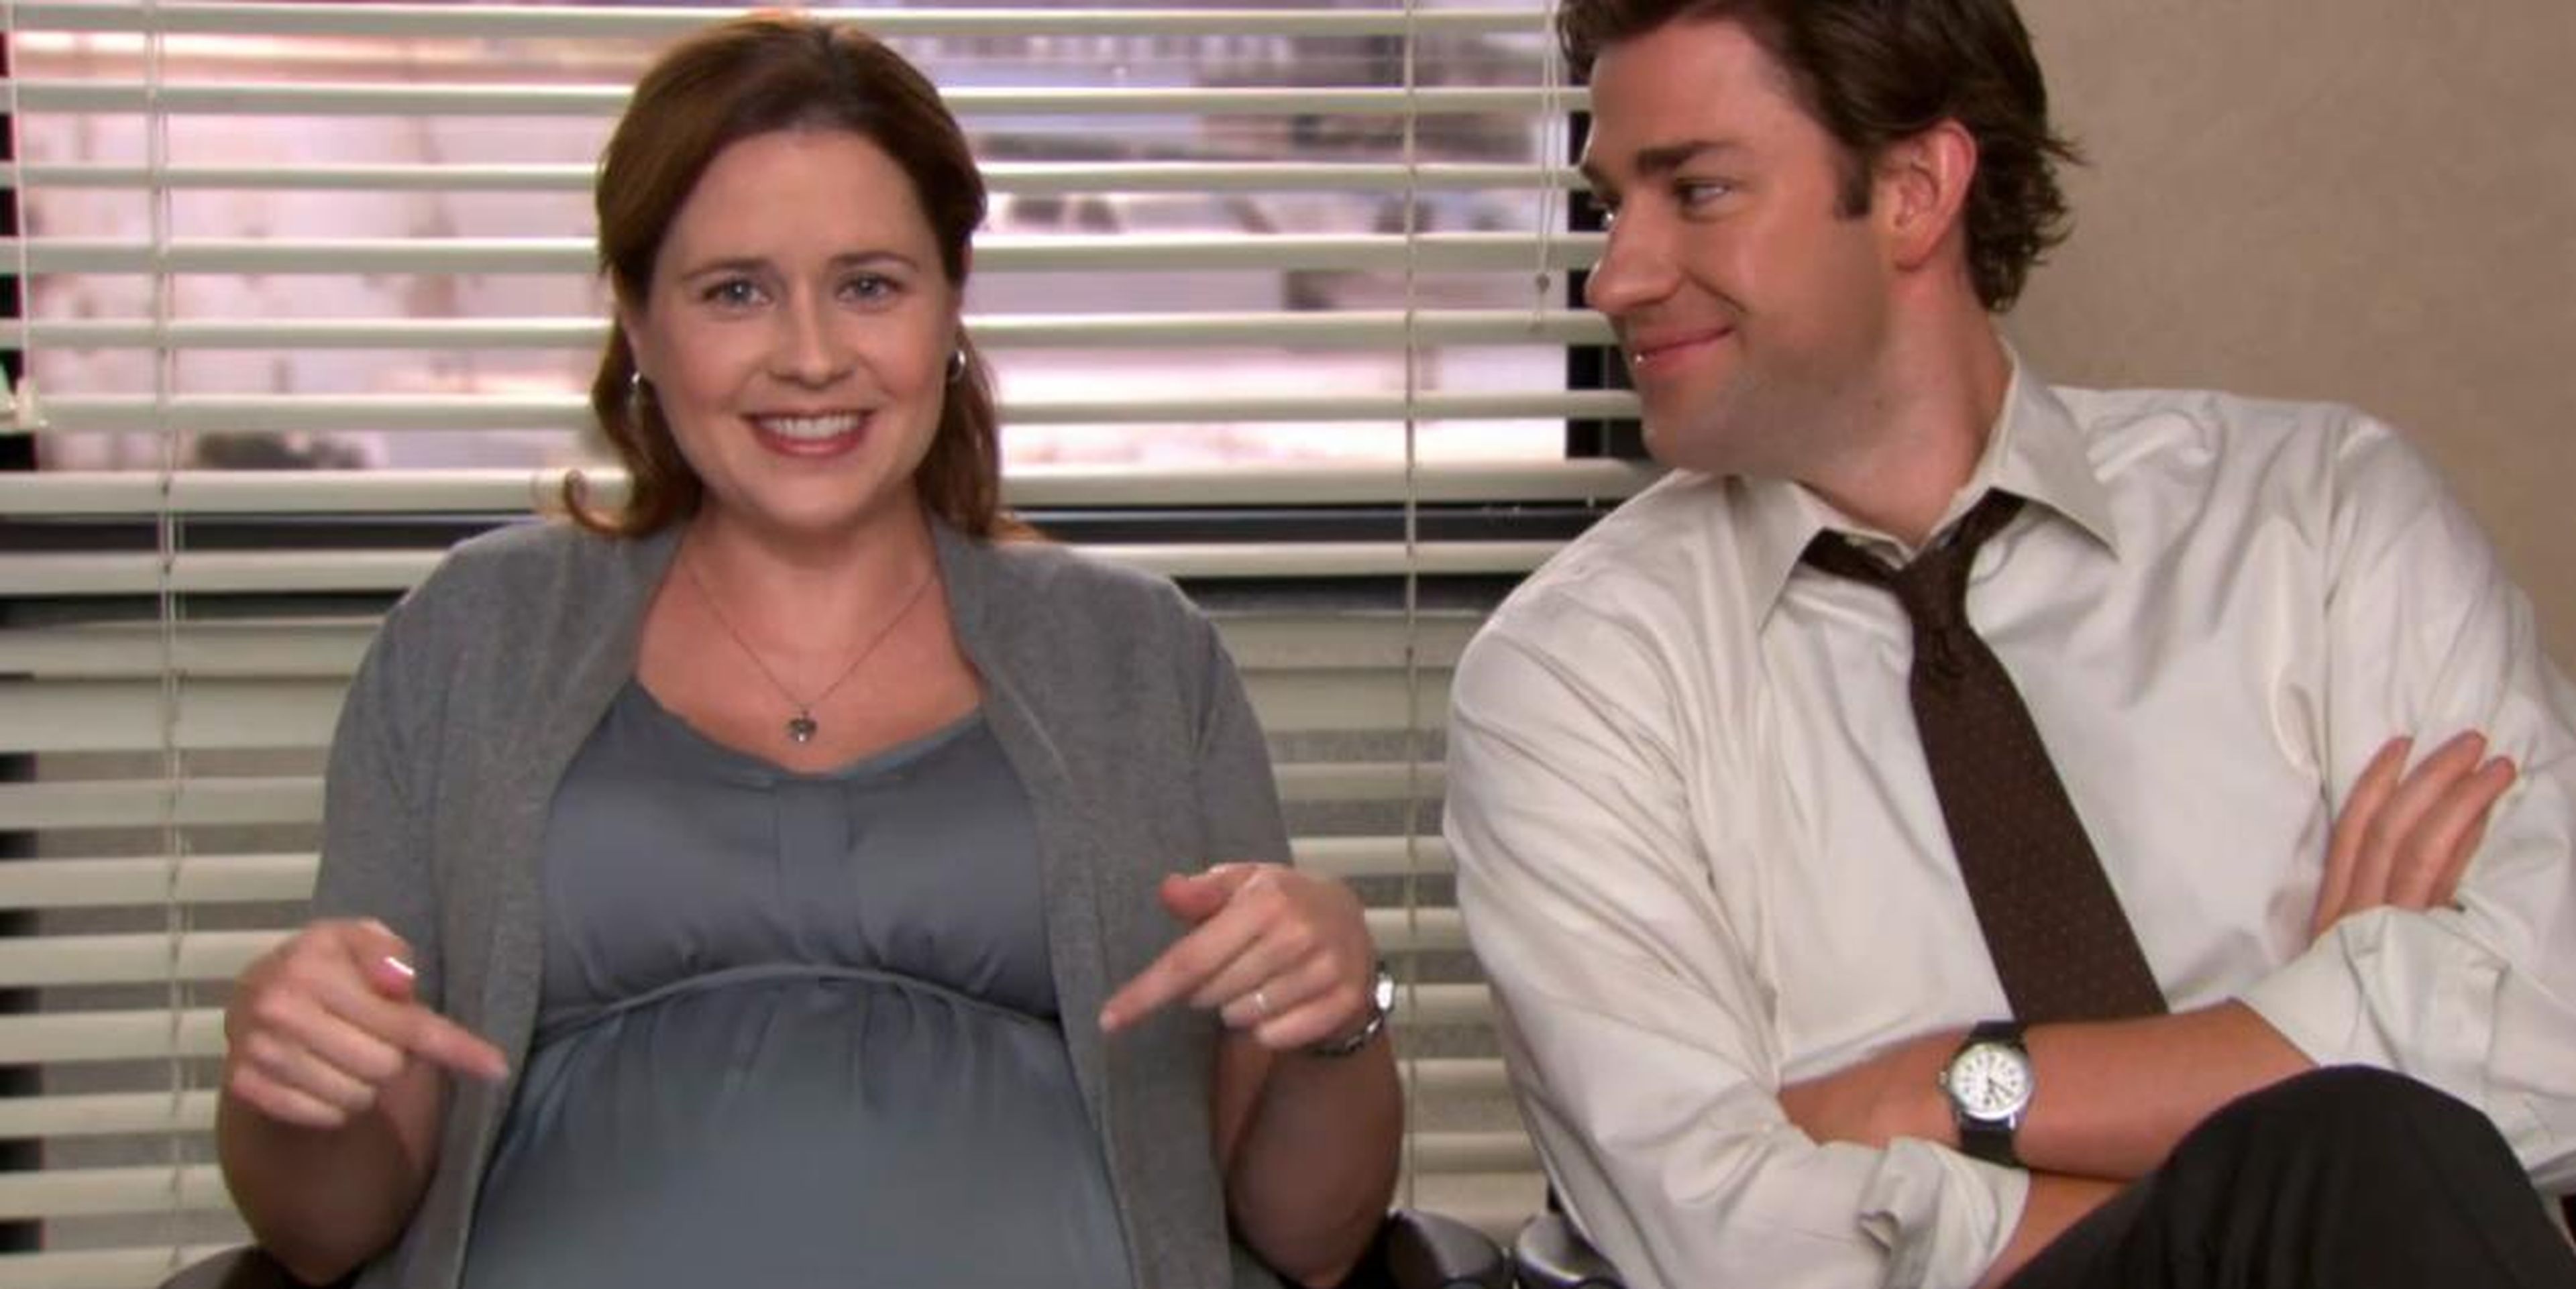 Never ask a coworker if she's pregnant